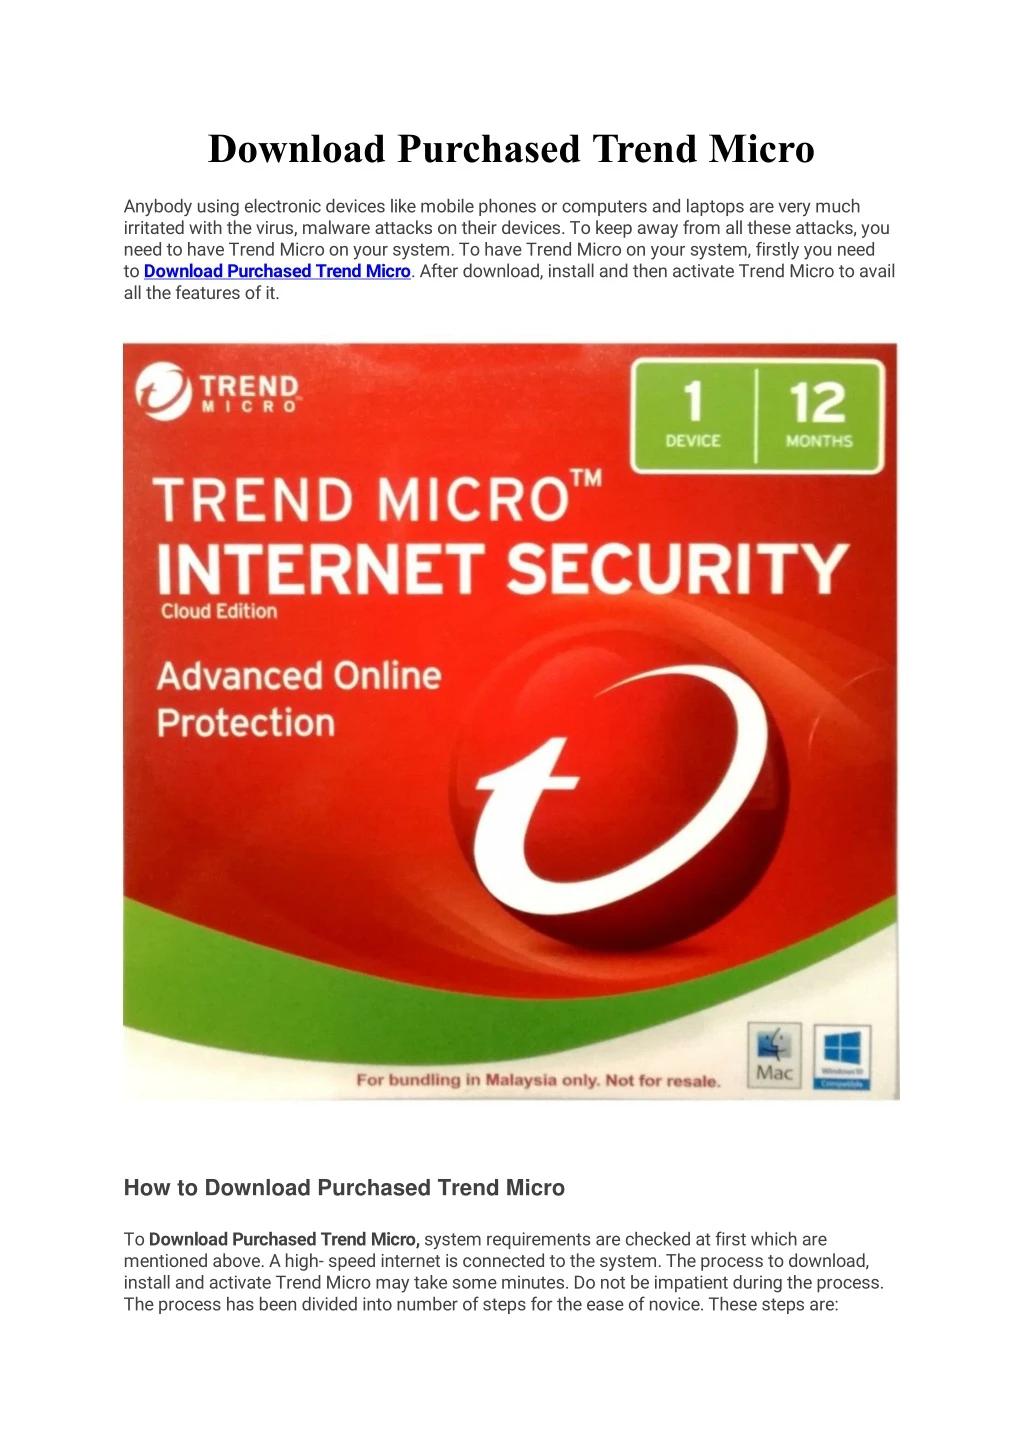 download purchased trend micro